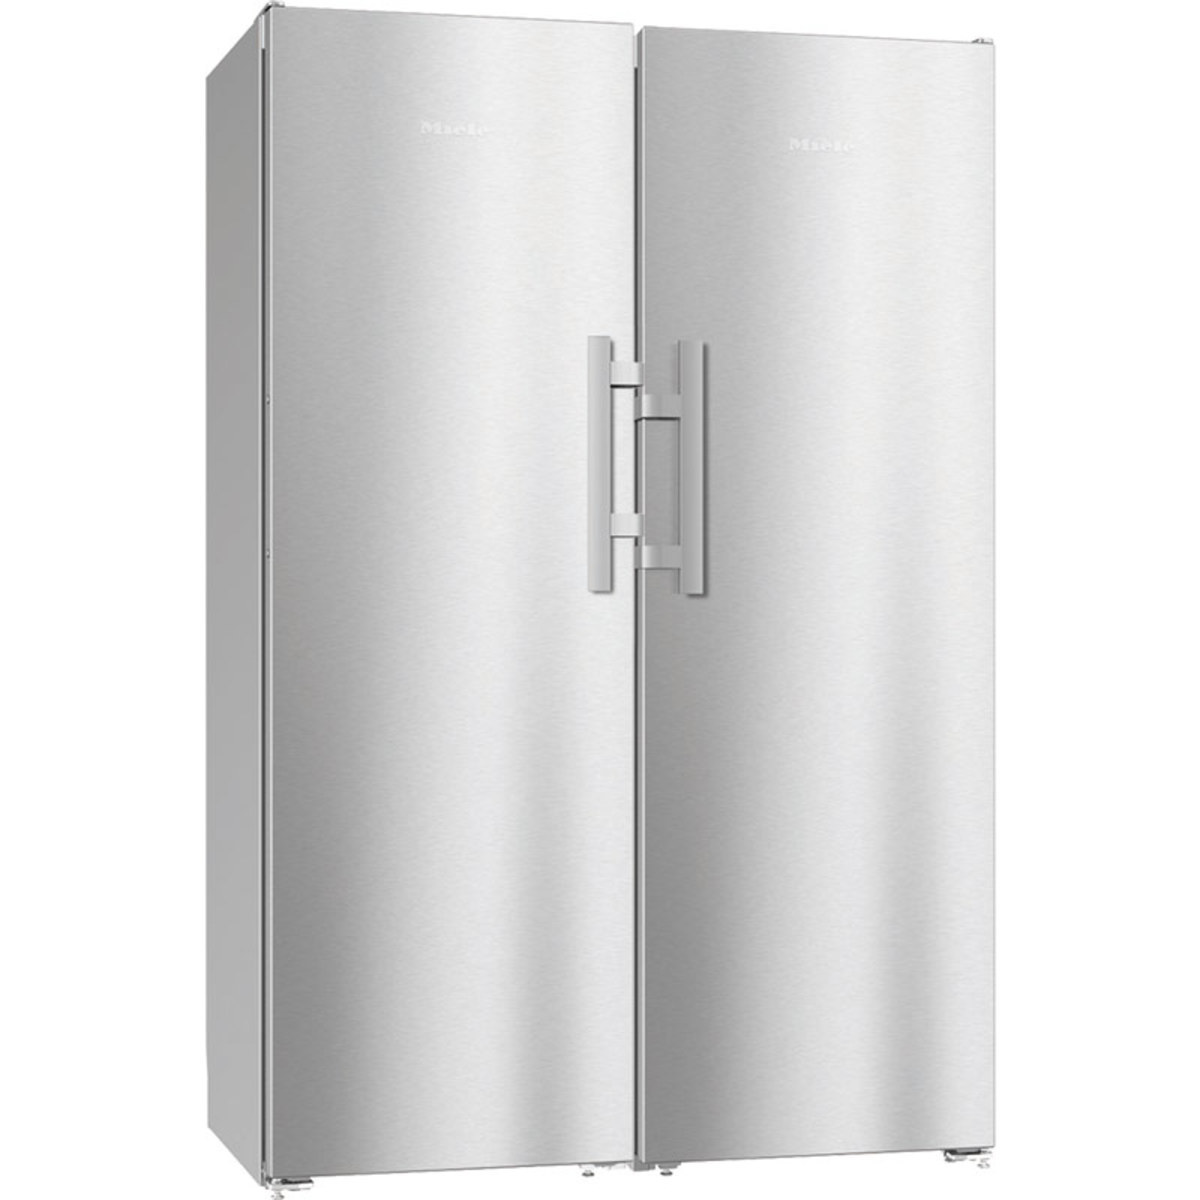 Miele K28202 D and FN 28262, Freestanding Fridge and Freezer Pair, F Rated in Clean Steel